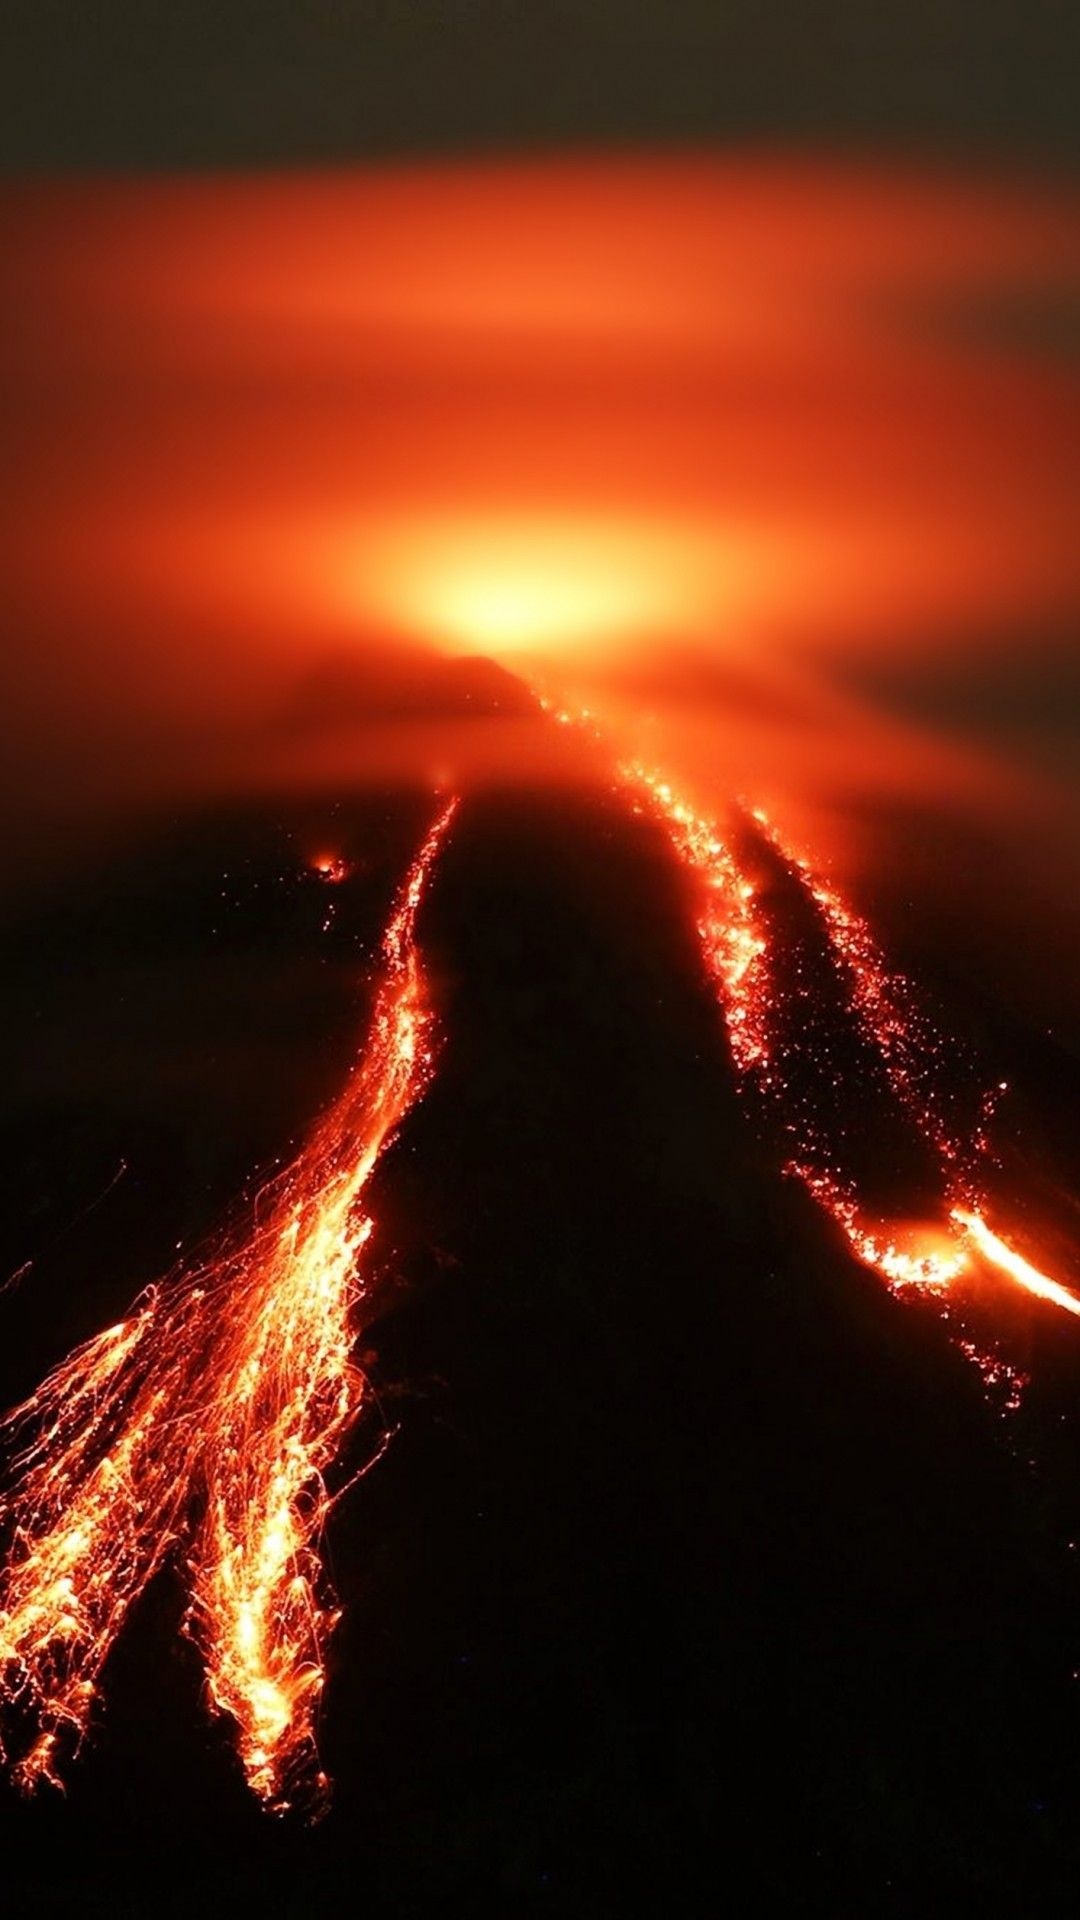 Volcanic eruption, Best background images, Raw power, Immersive landscapes, 1080x1920 Full HD Phone